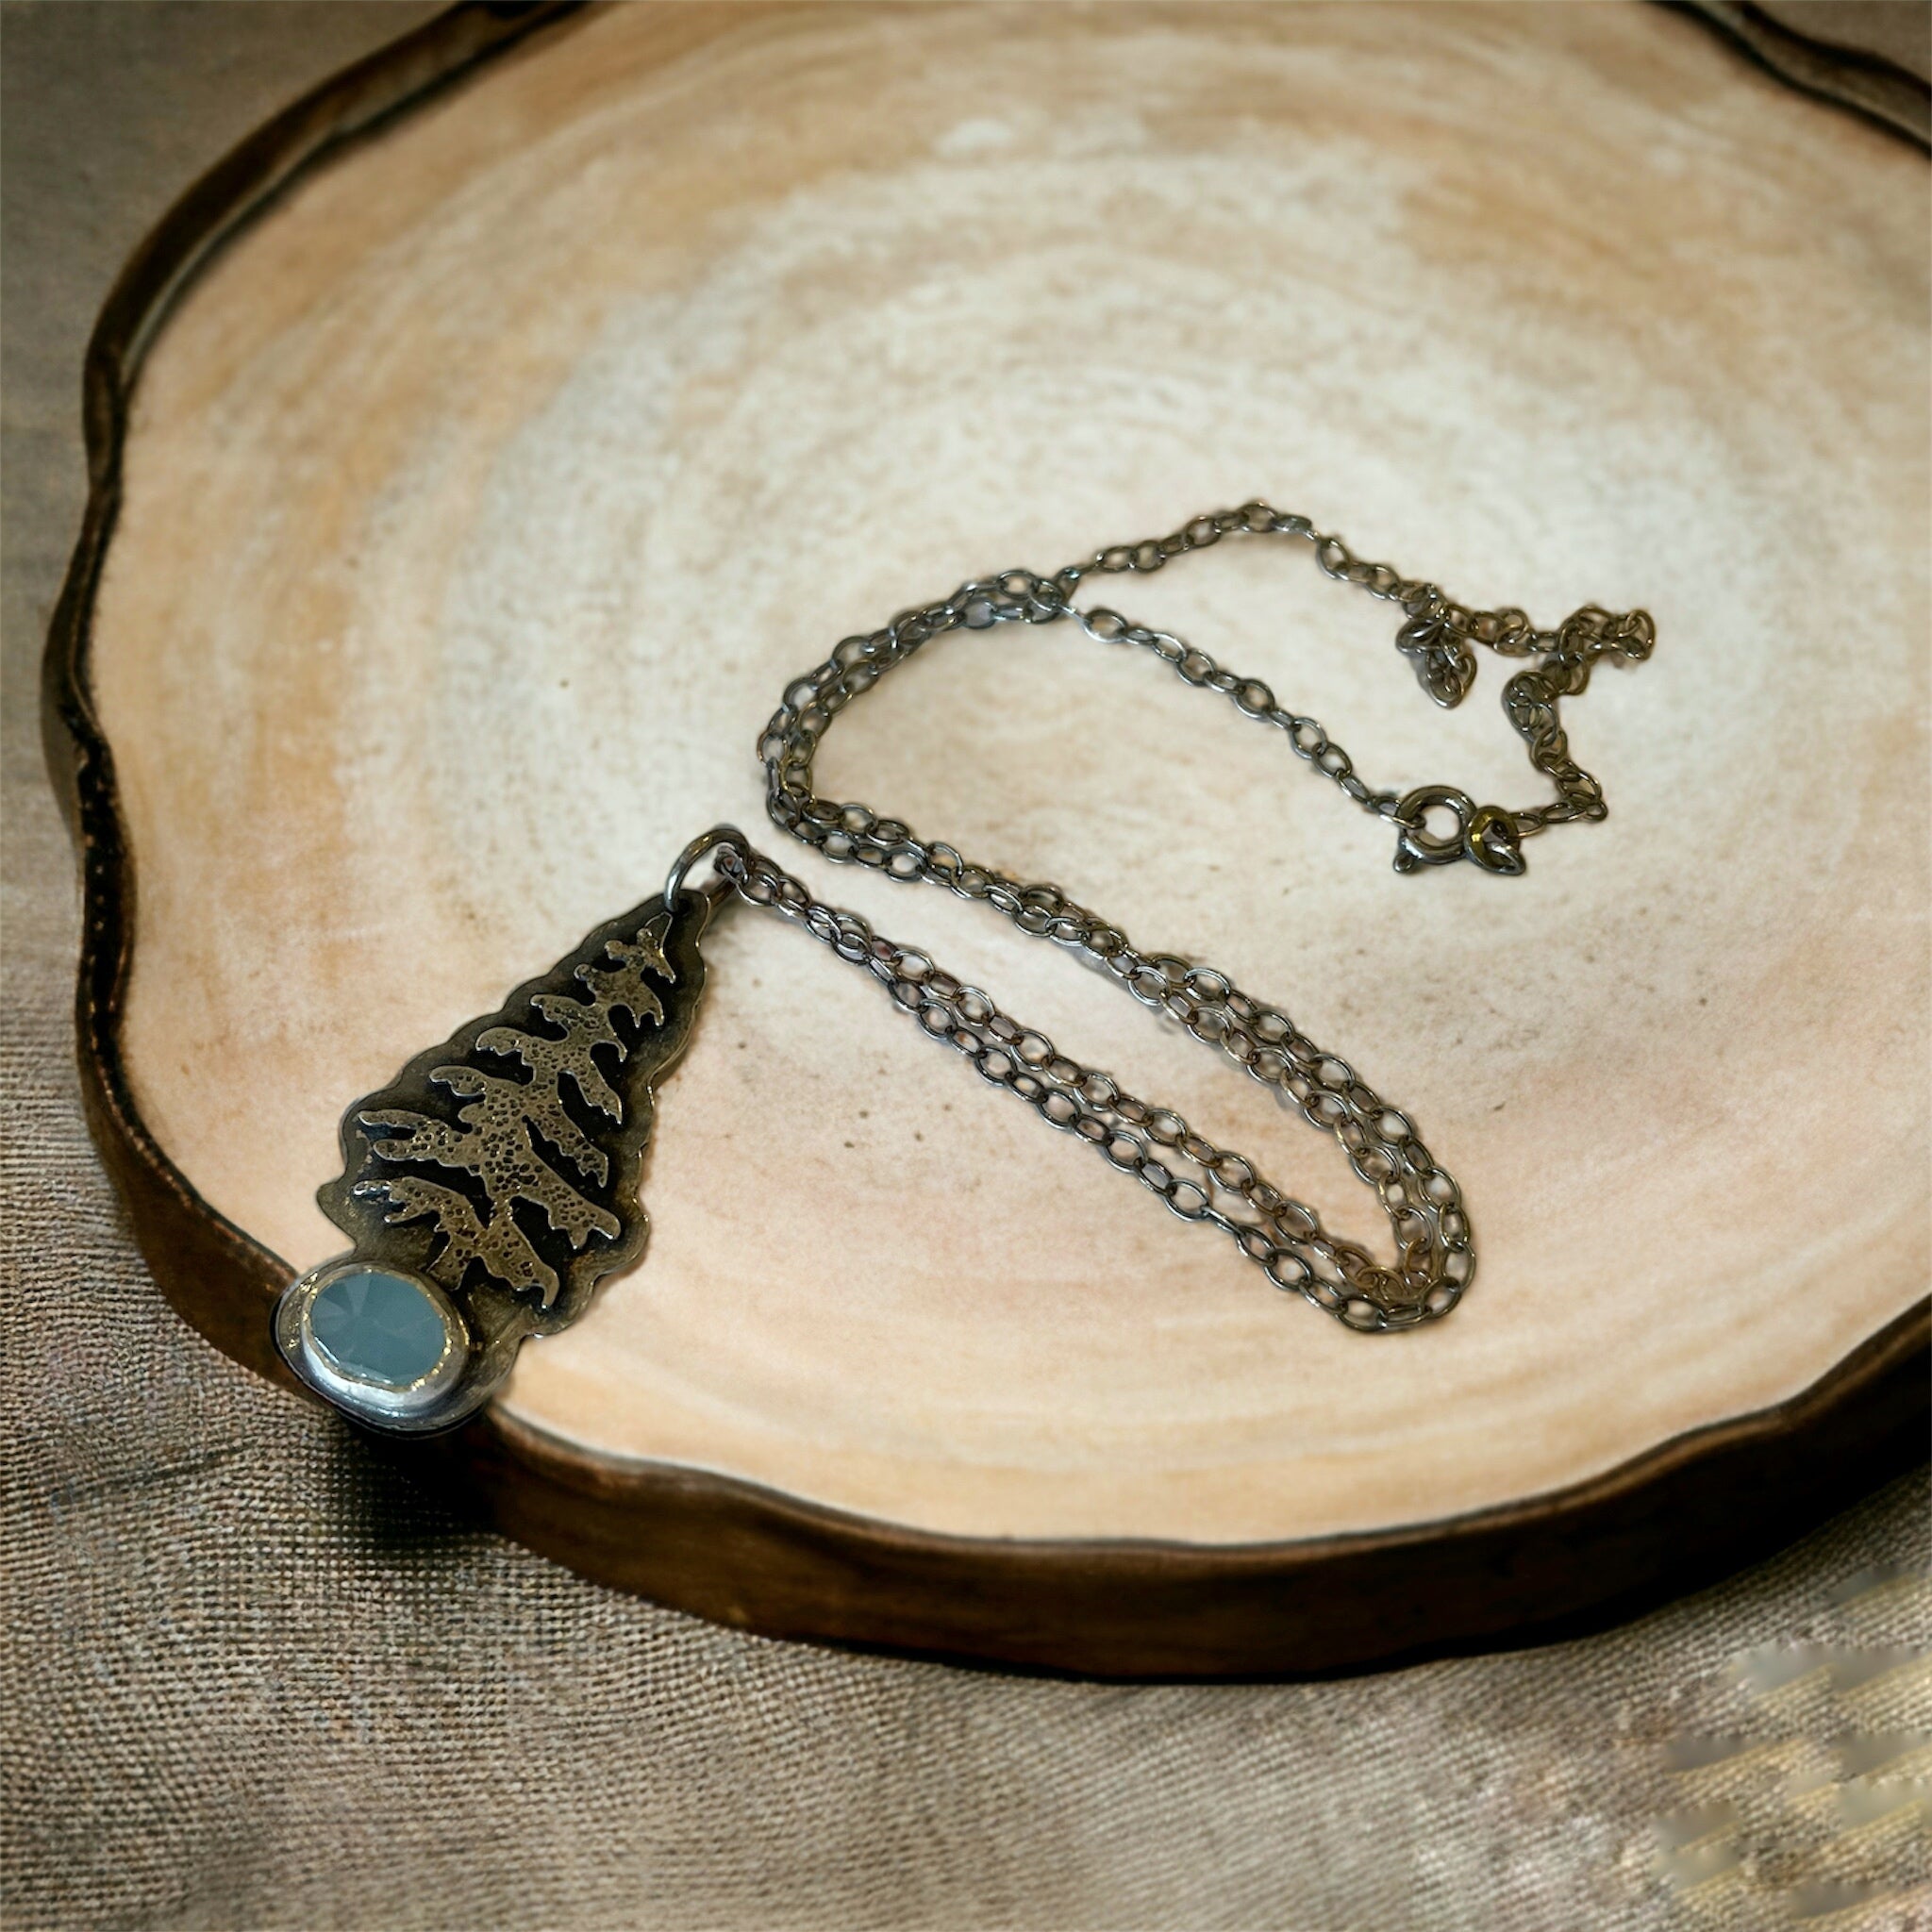 a necklace with a silver evergreen tree  and an aquamarine rests on a plate on a light tan background